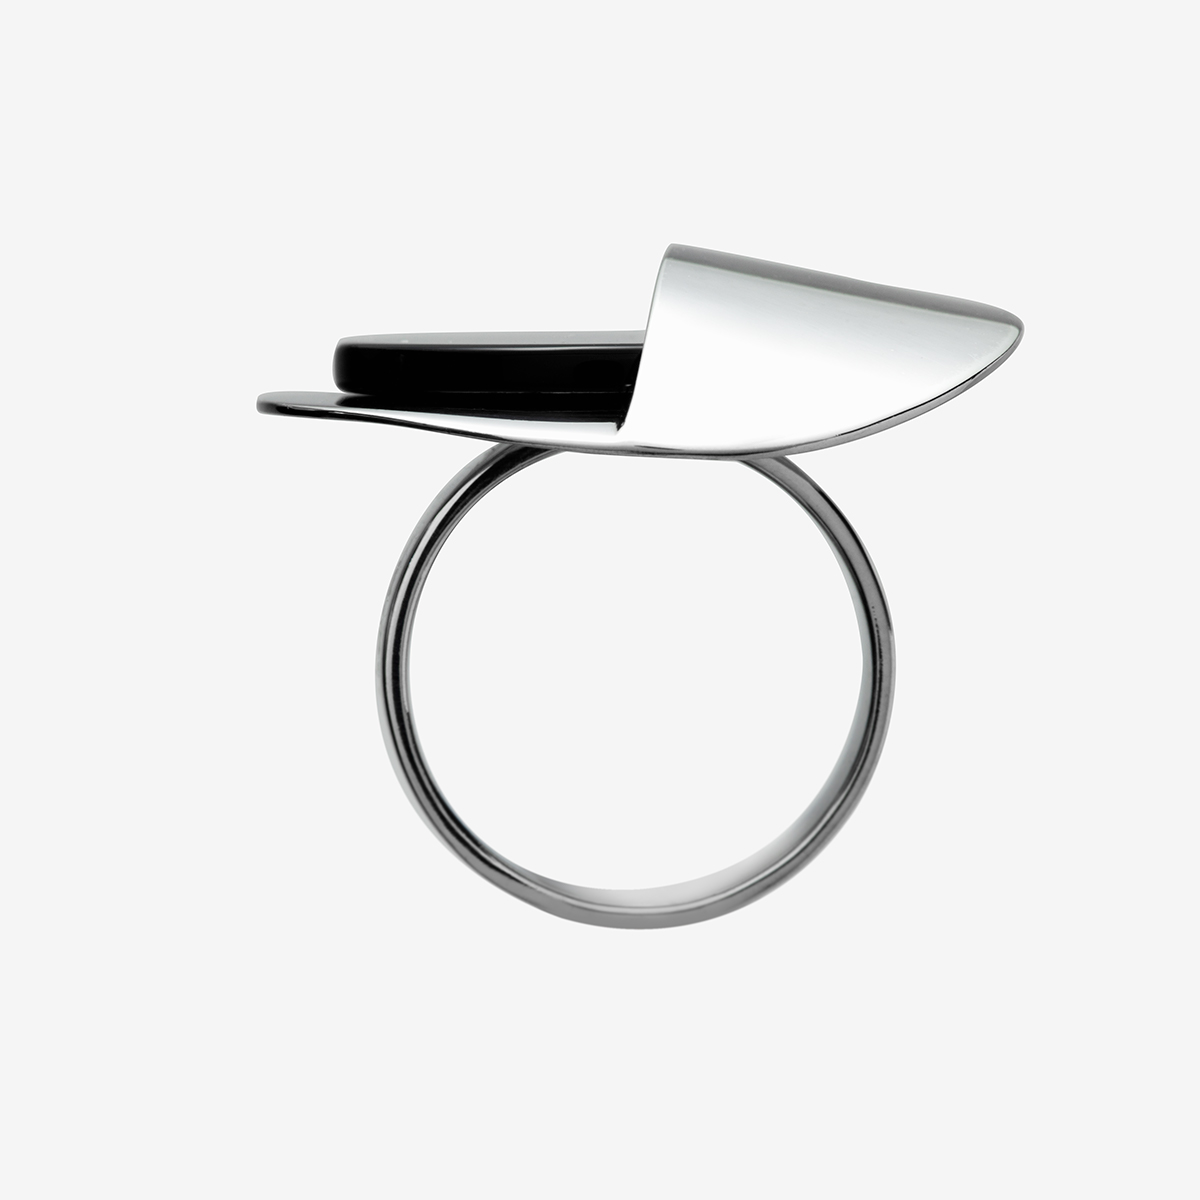 Nai handmade sterling silver and onyx ring 1 designed by Belen Bajo